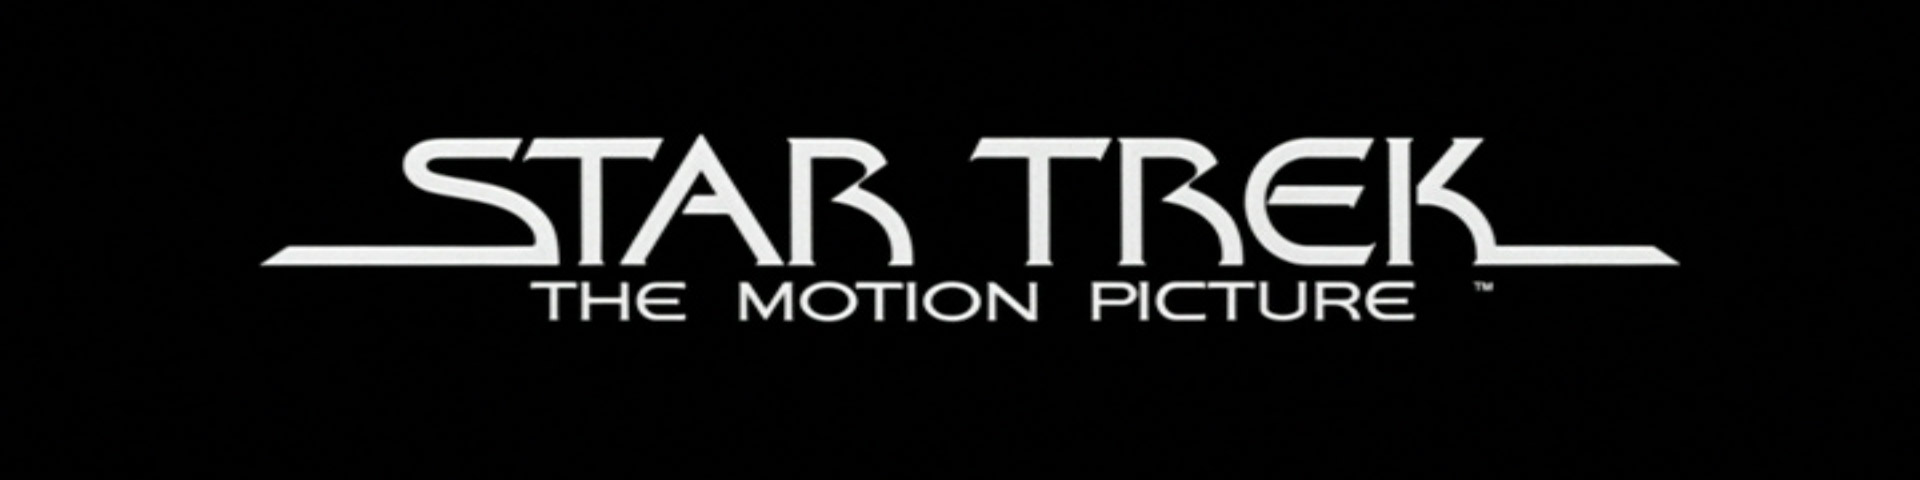 The newer typeface employed by the Star Trek motion picture. 